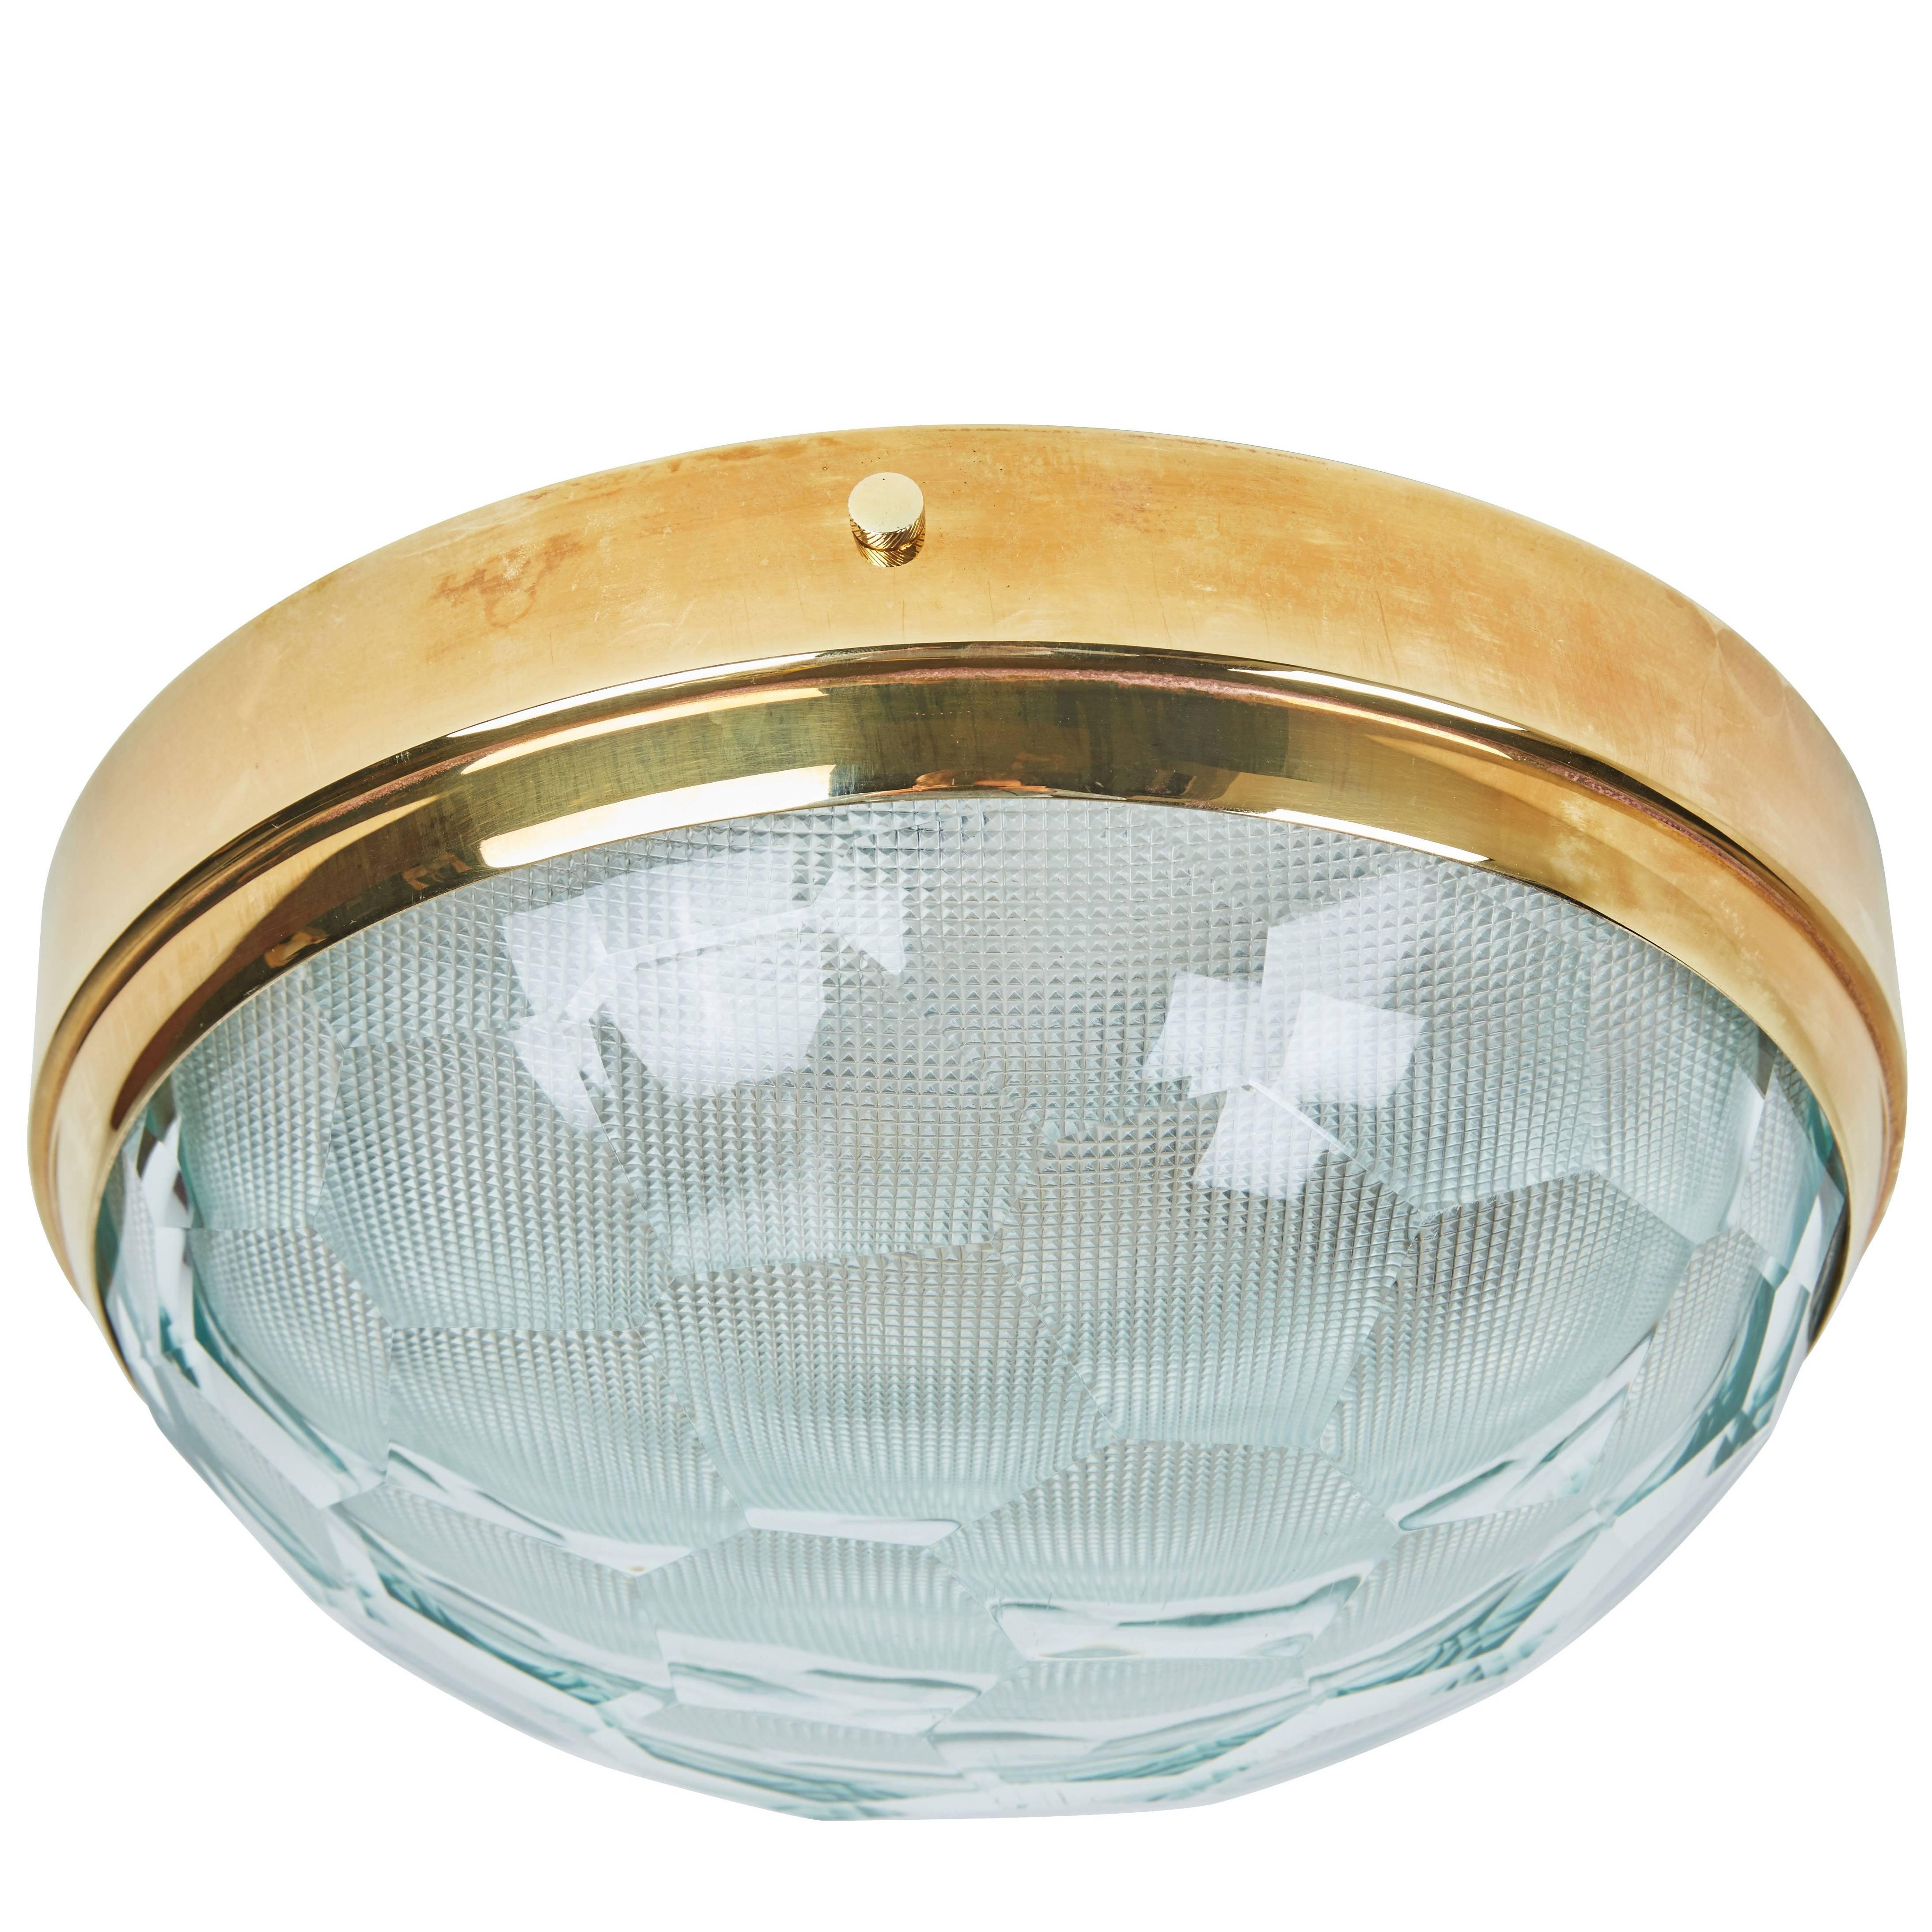 Multifaceted Glass and Brass Flushmount Ceiling Light